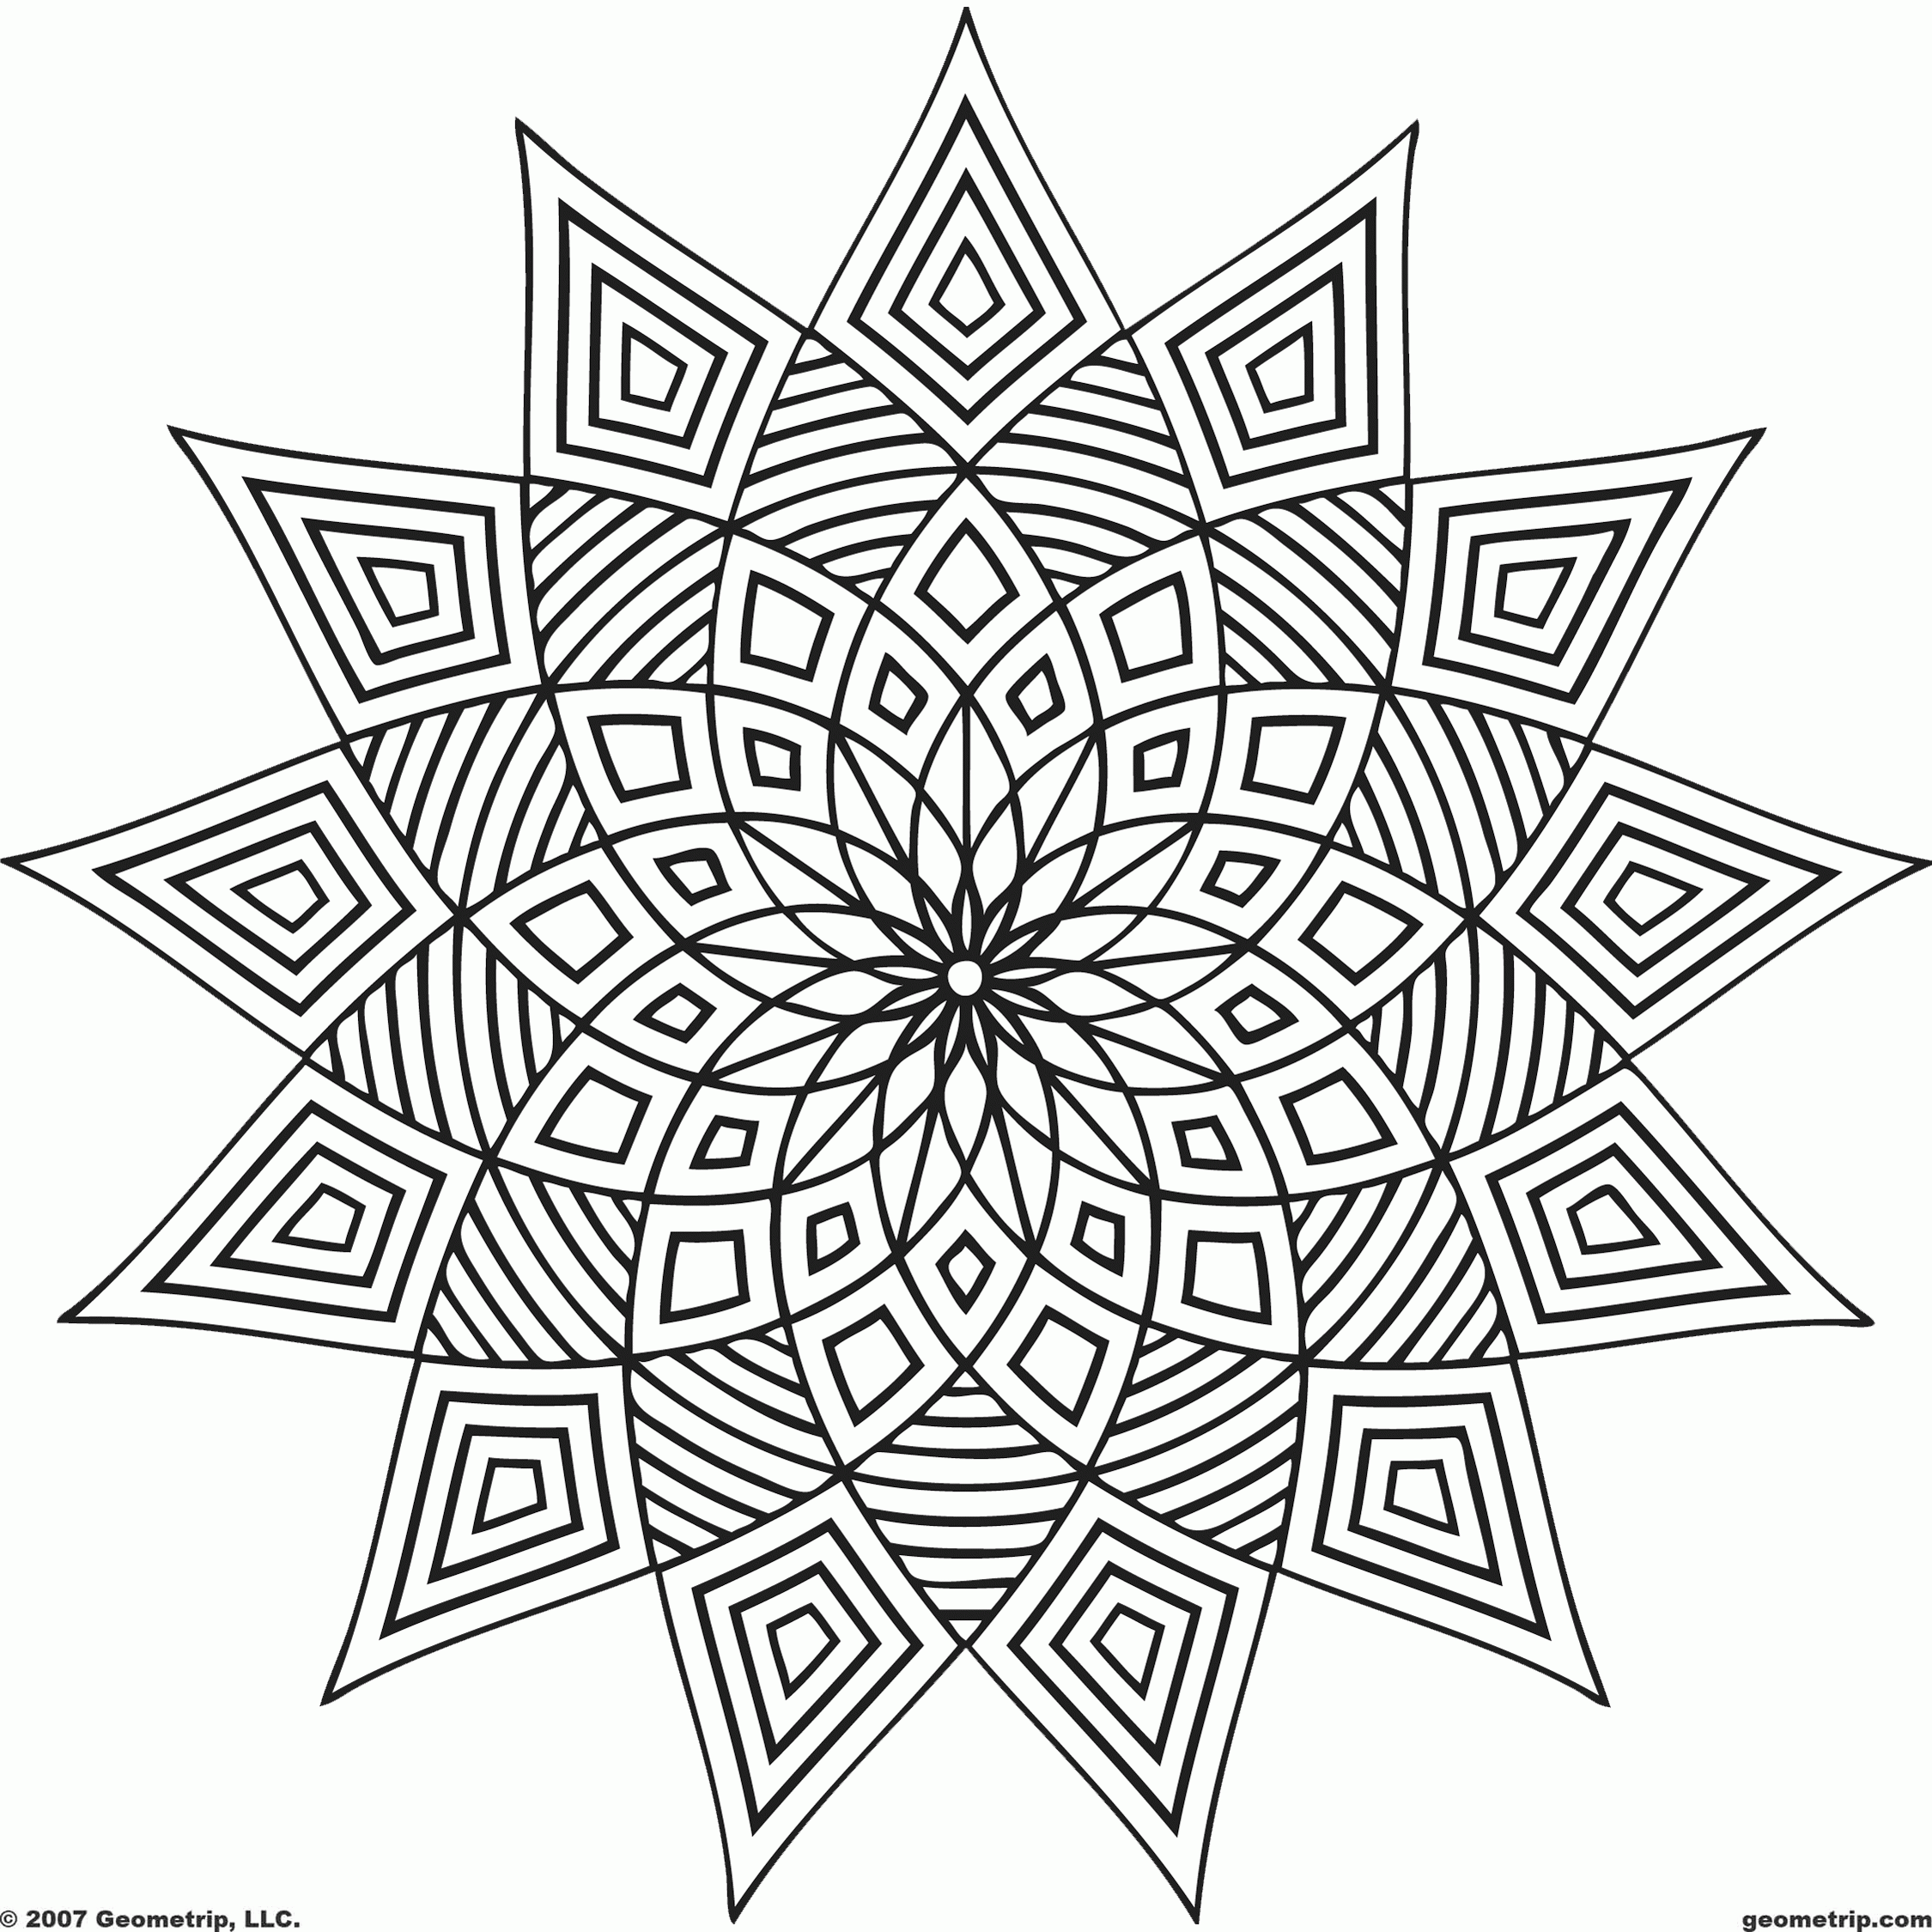 Degree Free Coloring Pages Of African Pattern - Widetheme